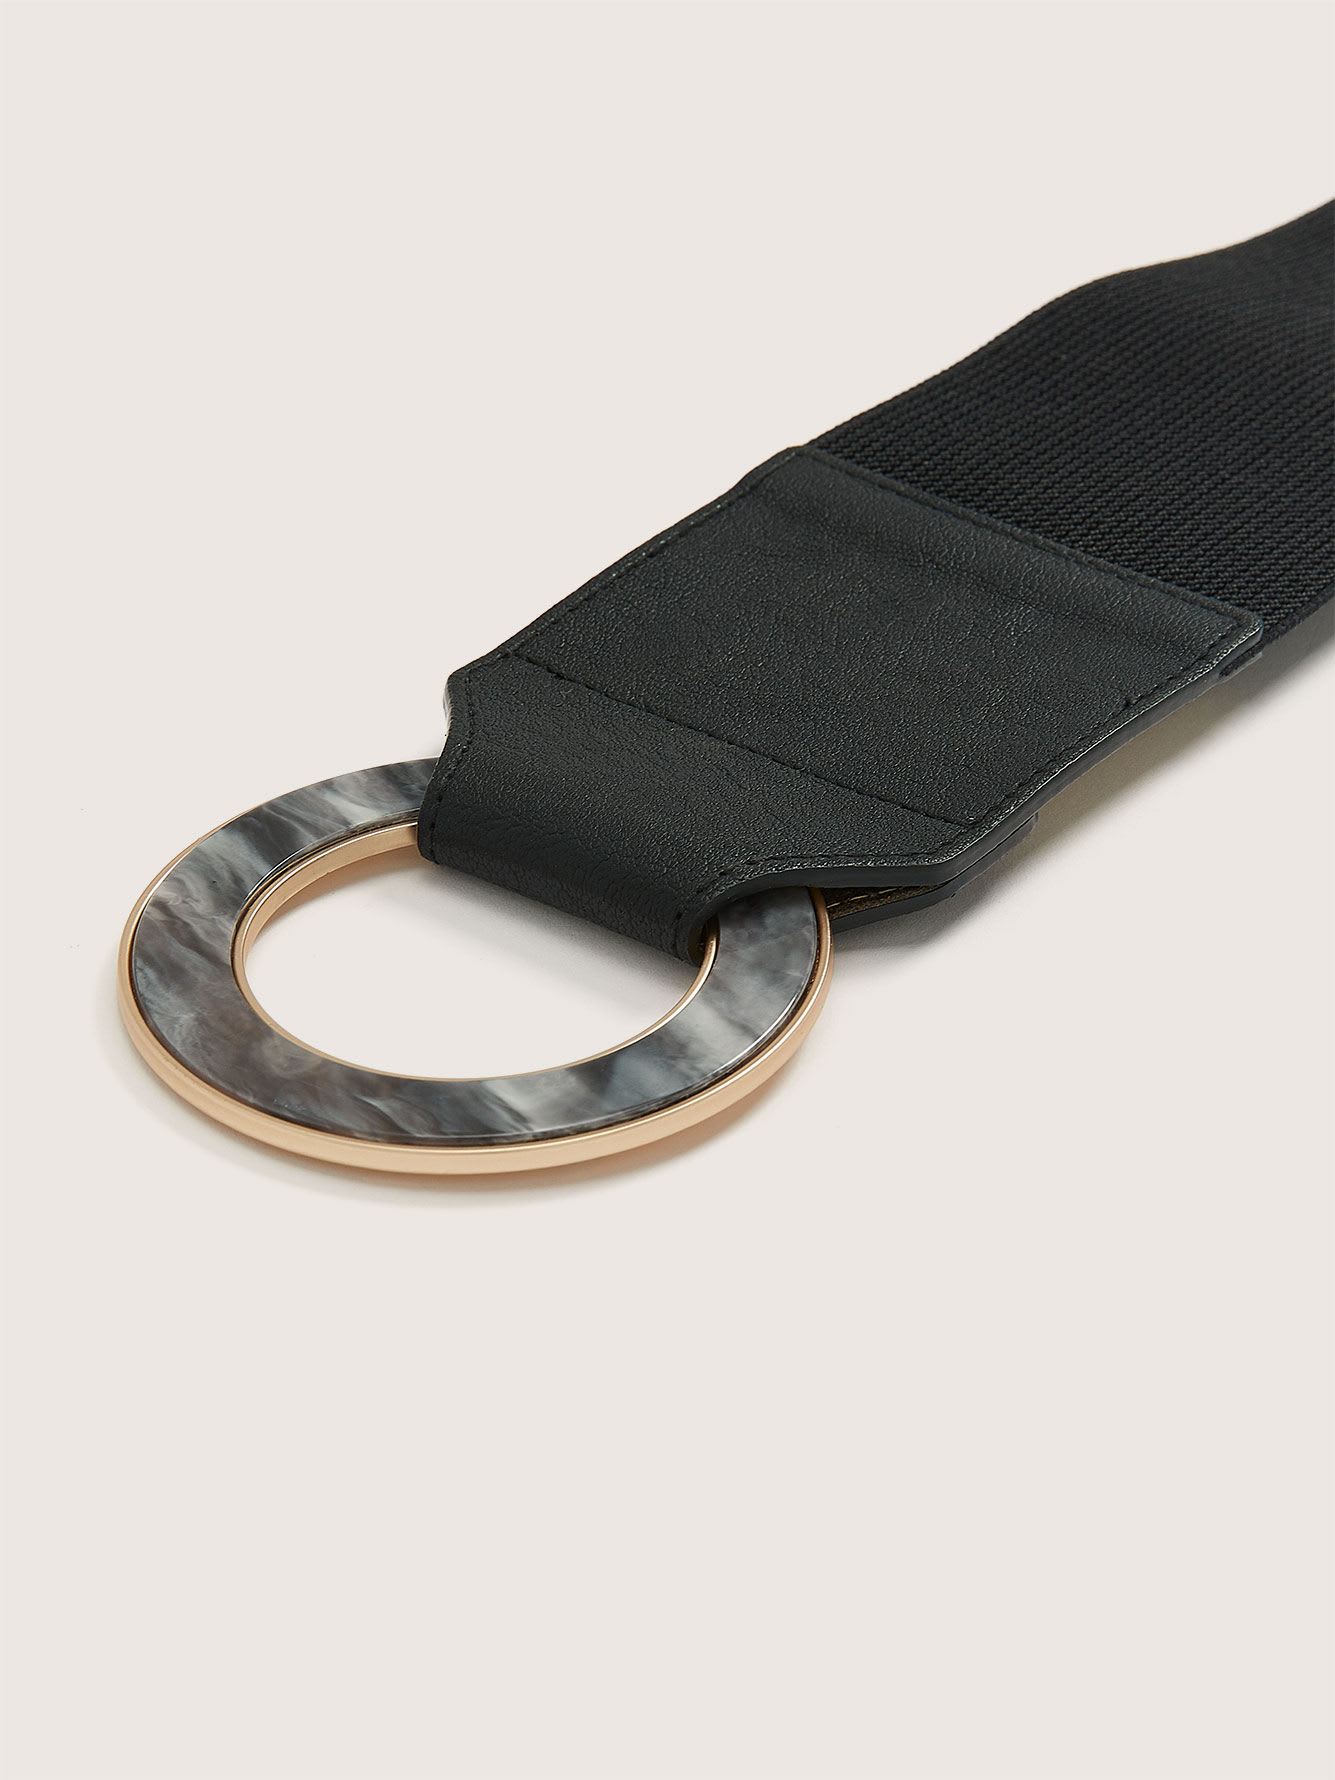 Wide Elastic Belt with Fancy Round Buckle